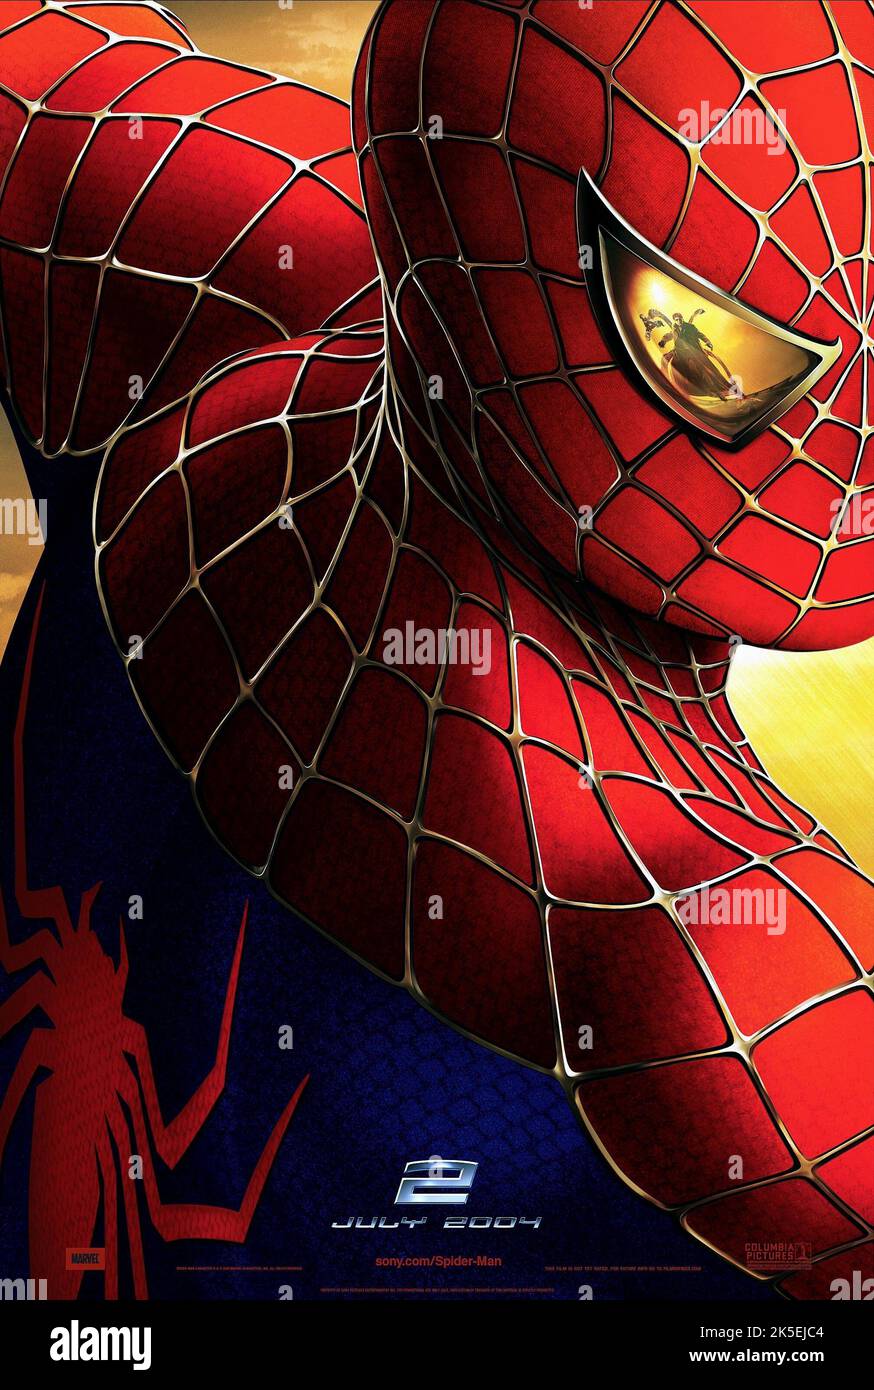 TOBEY Maguire, Alfred Molina POSTER, SPIDER-MAN 2, 2004 Foto Stock